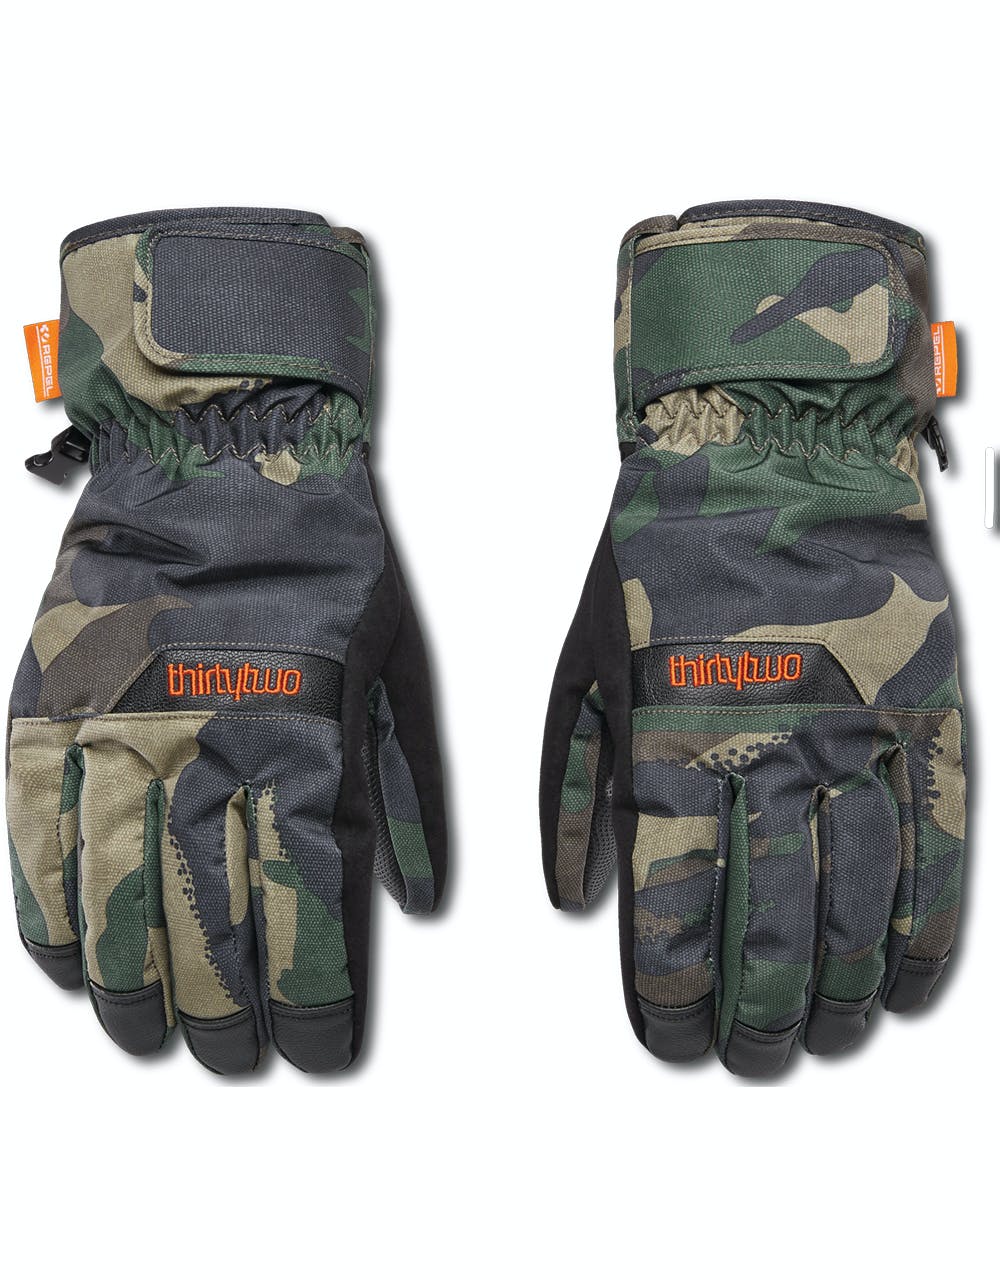 ThirtyTwo Corp 2020 Snowboard Gloves - Camo